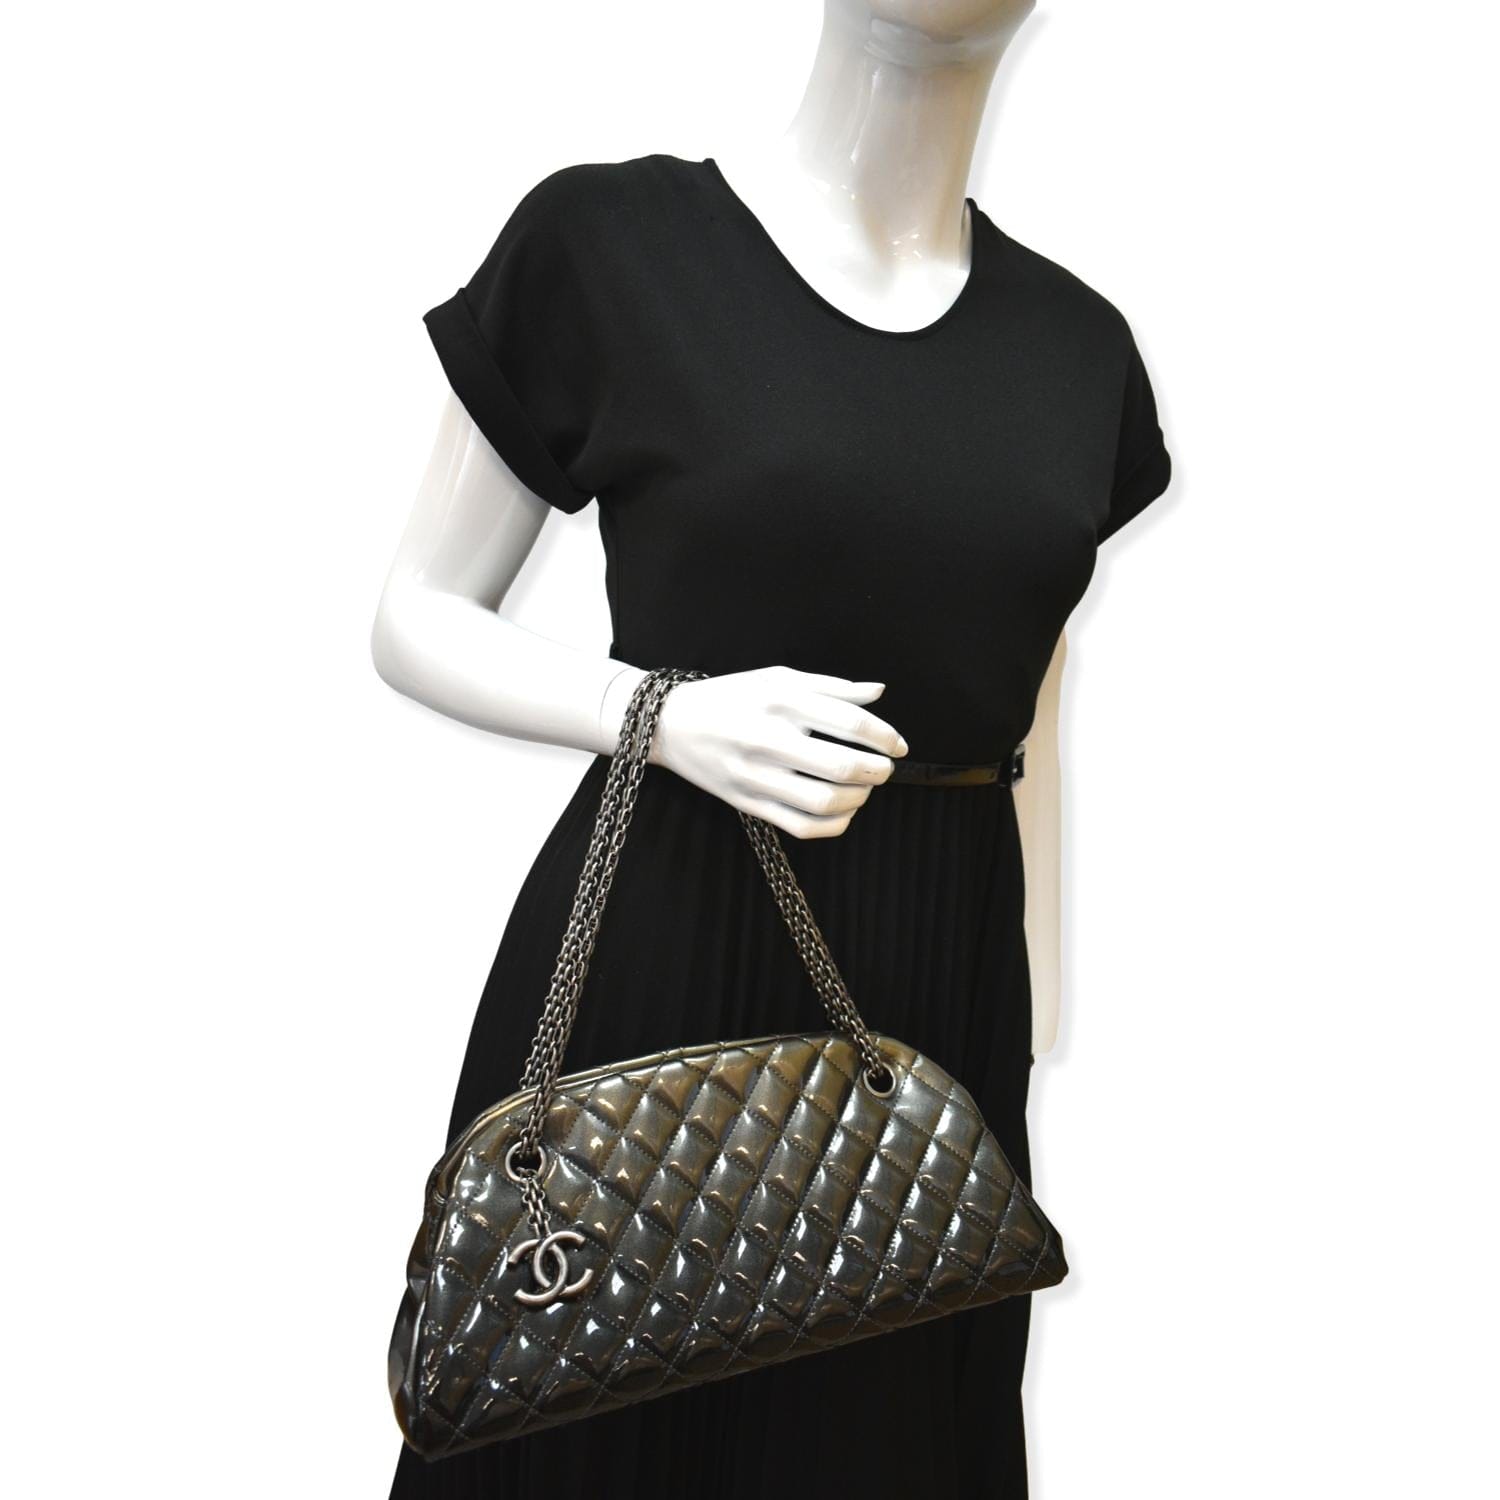 USED Chanel Black Patent Quilted Medium Just Mademoiselle Bowling Bag  AUTHENTIC